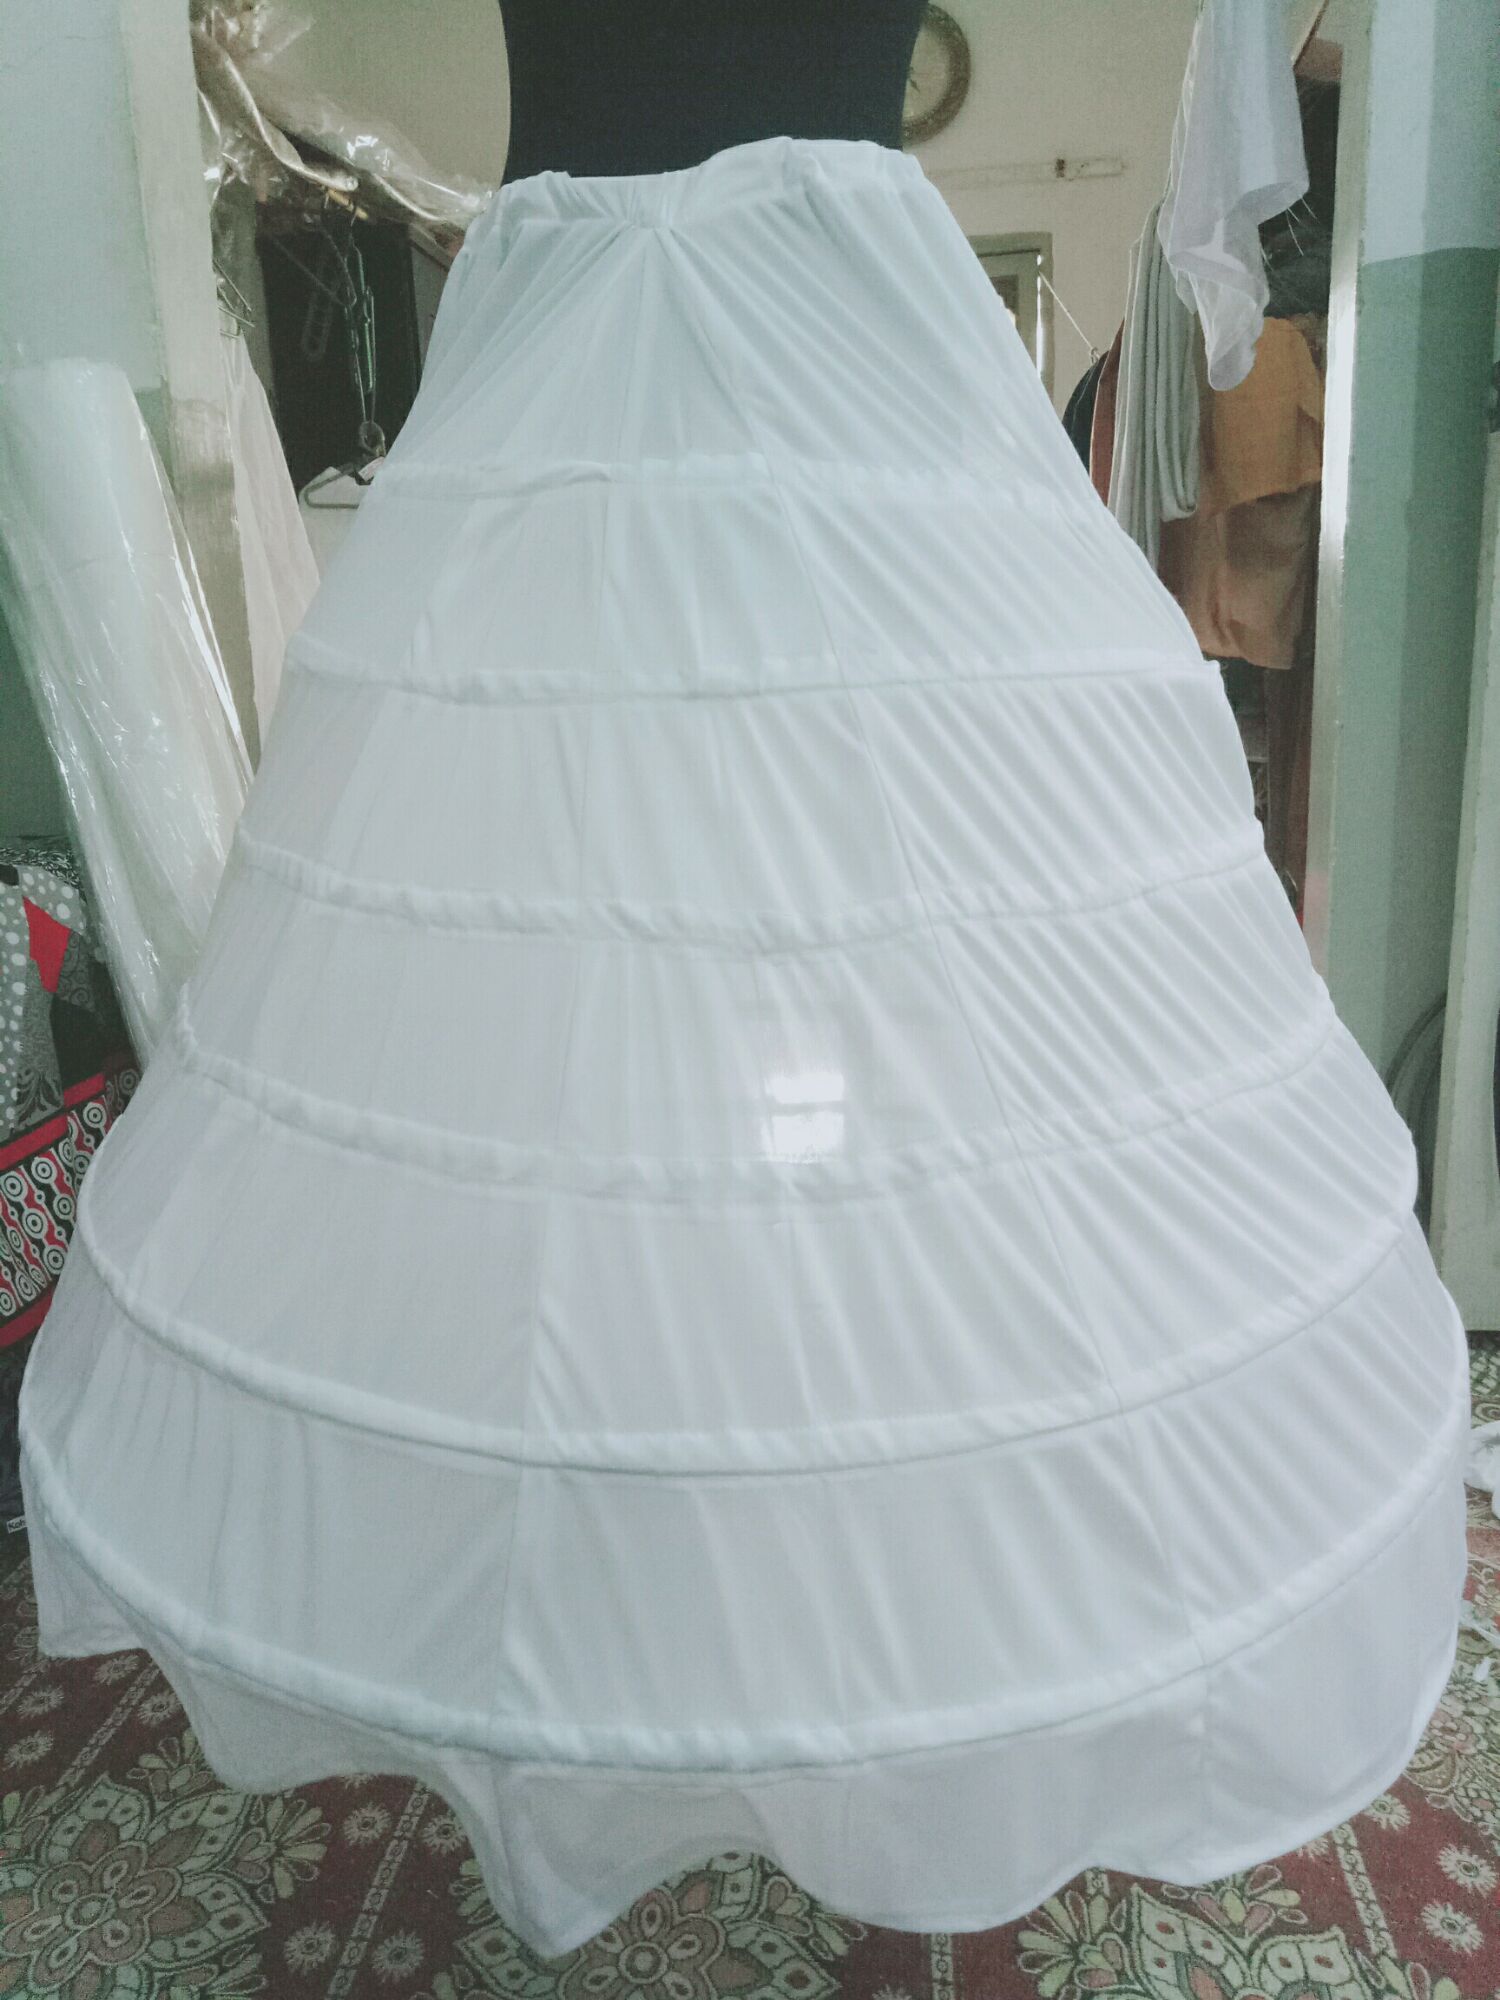 In Stock 1 Hoop Ball Gown Petticoat A-Line Wedding Bridal Underskirts  Crinoline Slip Evening Party Skirt | Shopee Malaysia